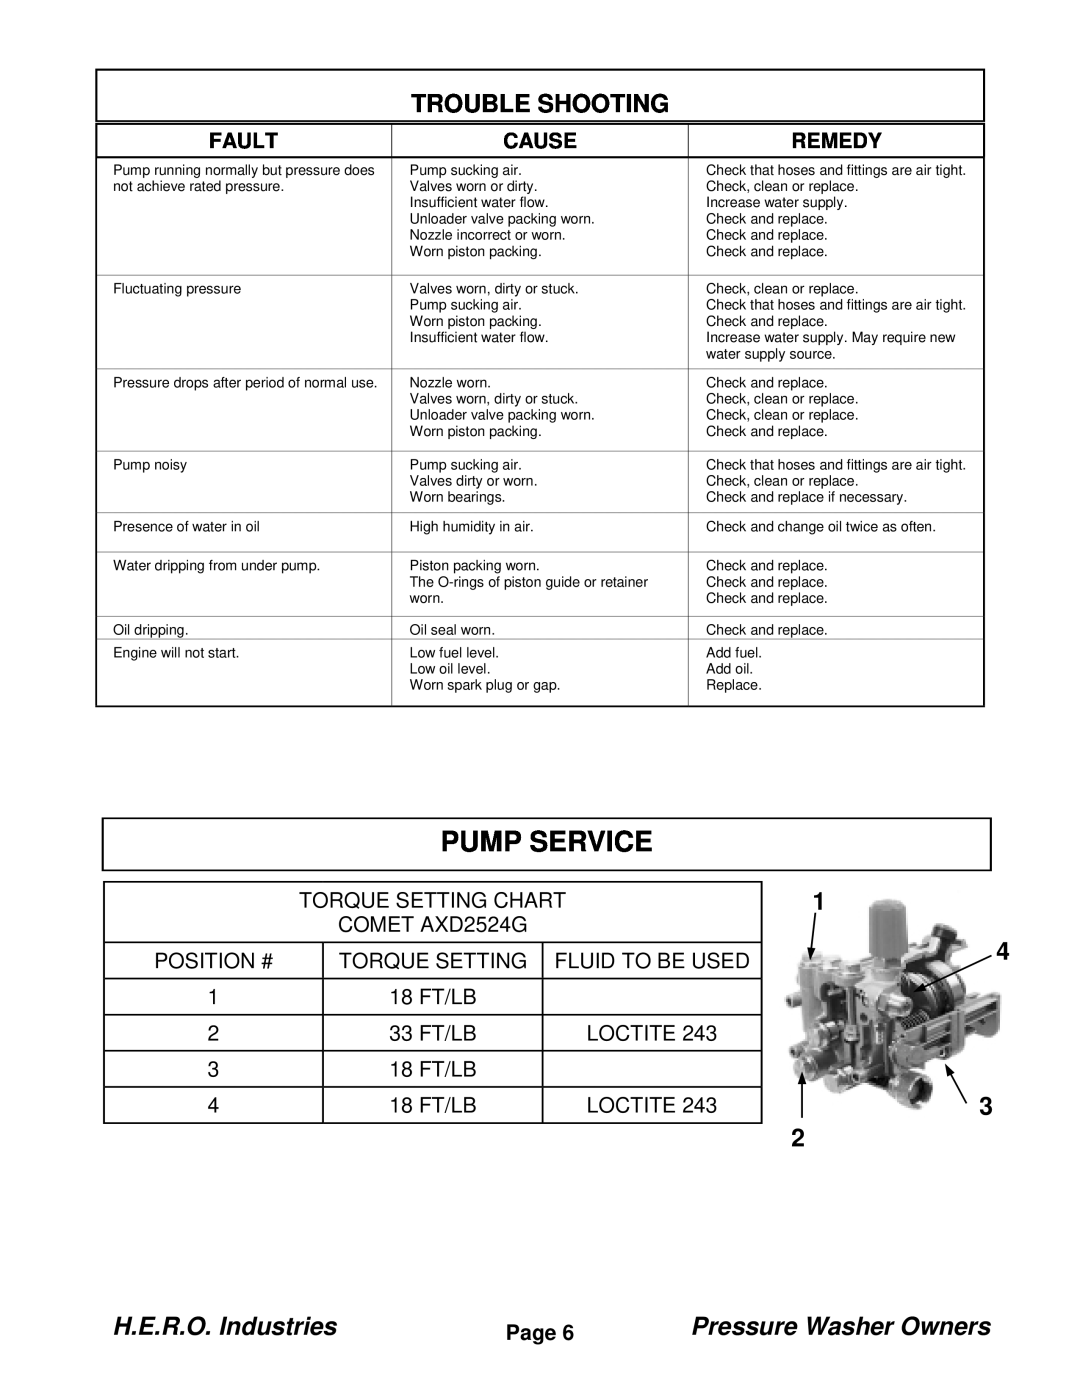 I.C.T.C. Holdings Corporation PW2424-LD manual Pump Service, Trouble Shooting, H.E.R.O. Industries, Pressure Washer Owners 